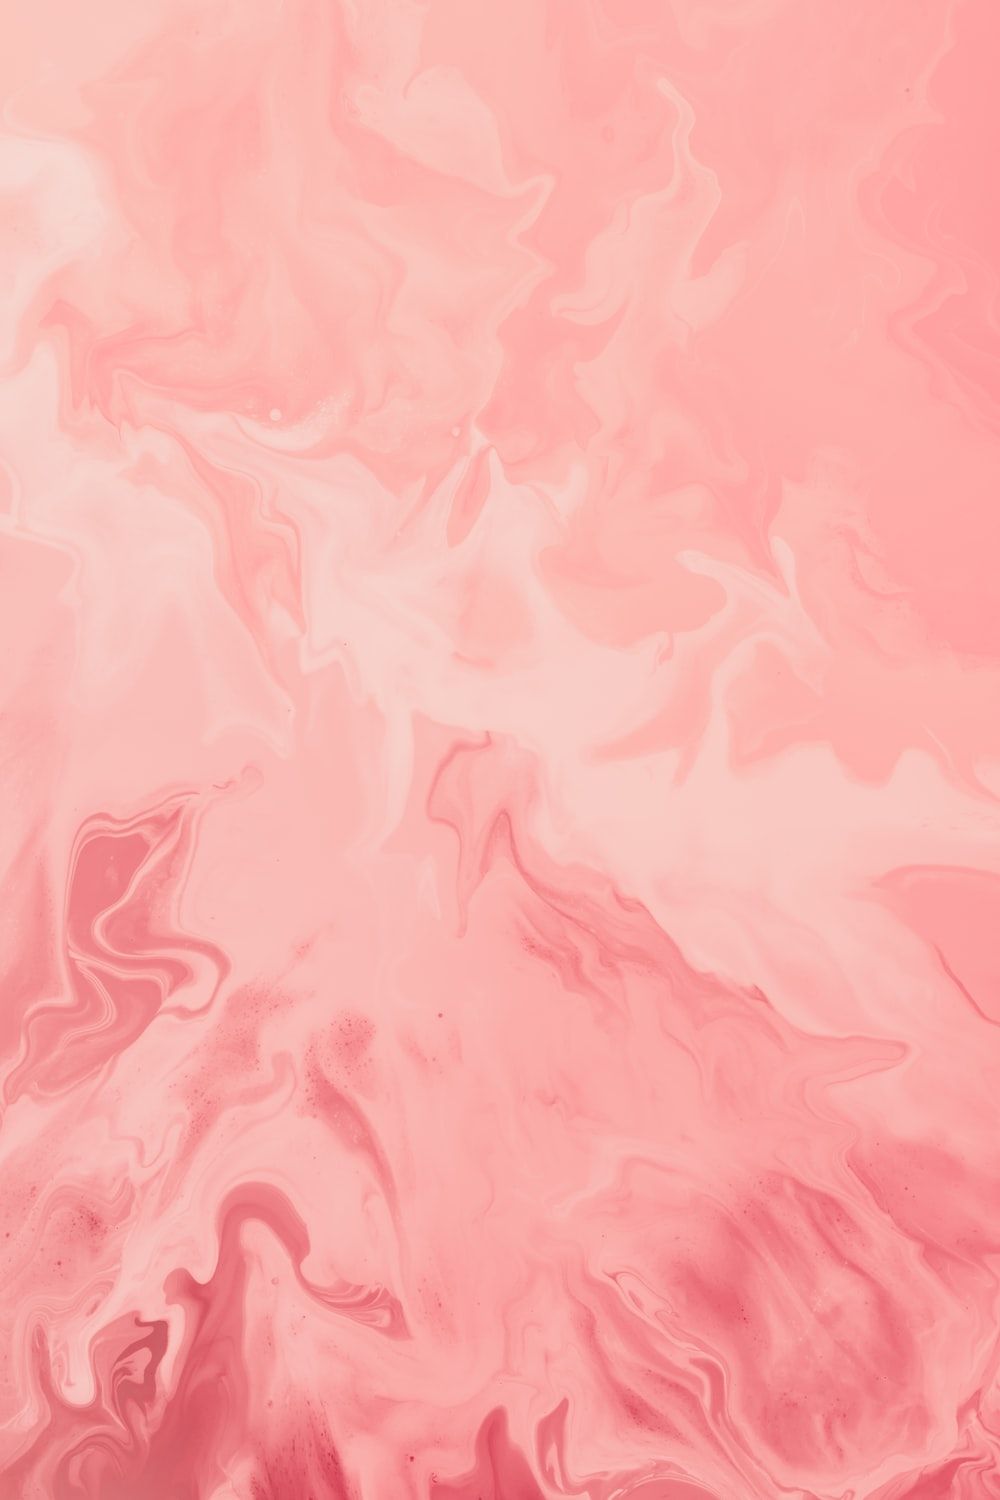 A close up of a pink and white marbled surface - Salmon